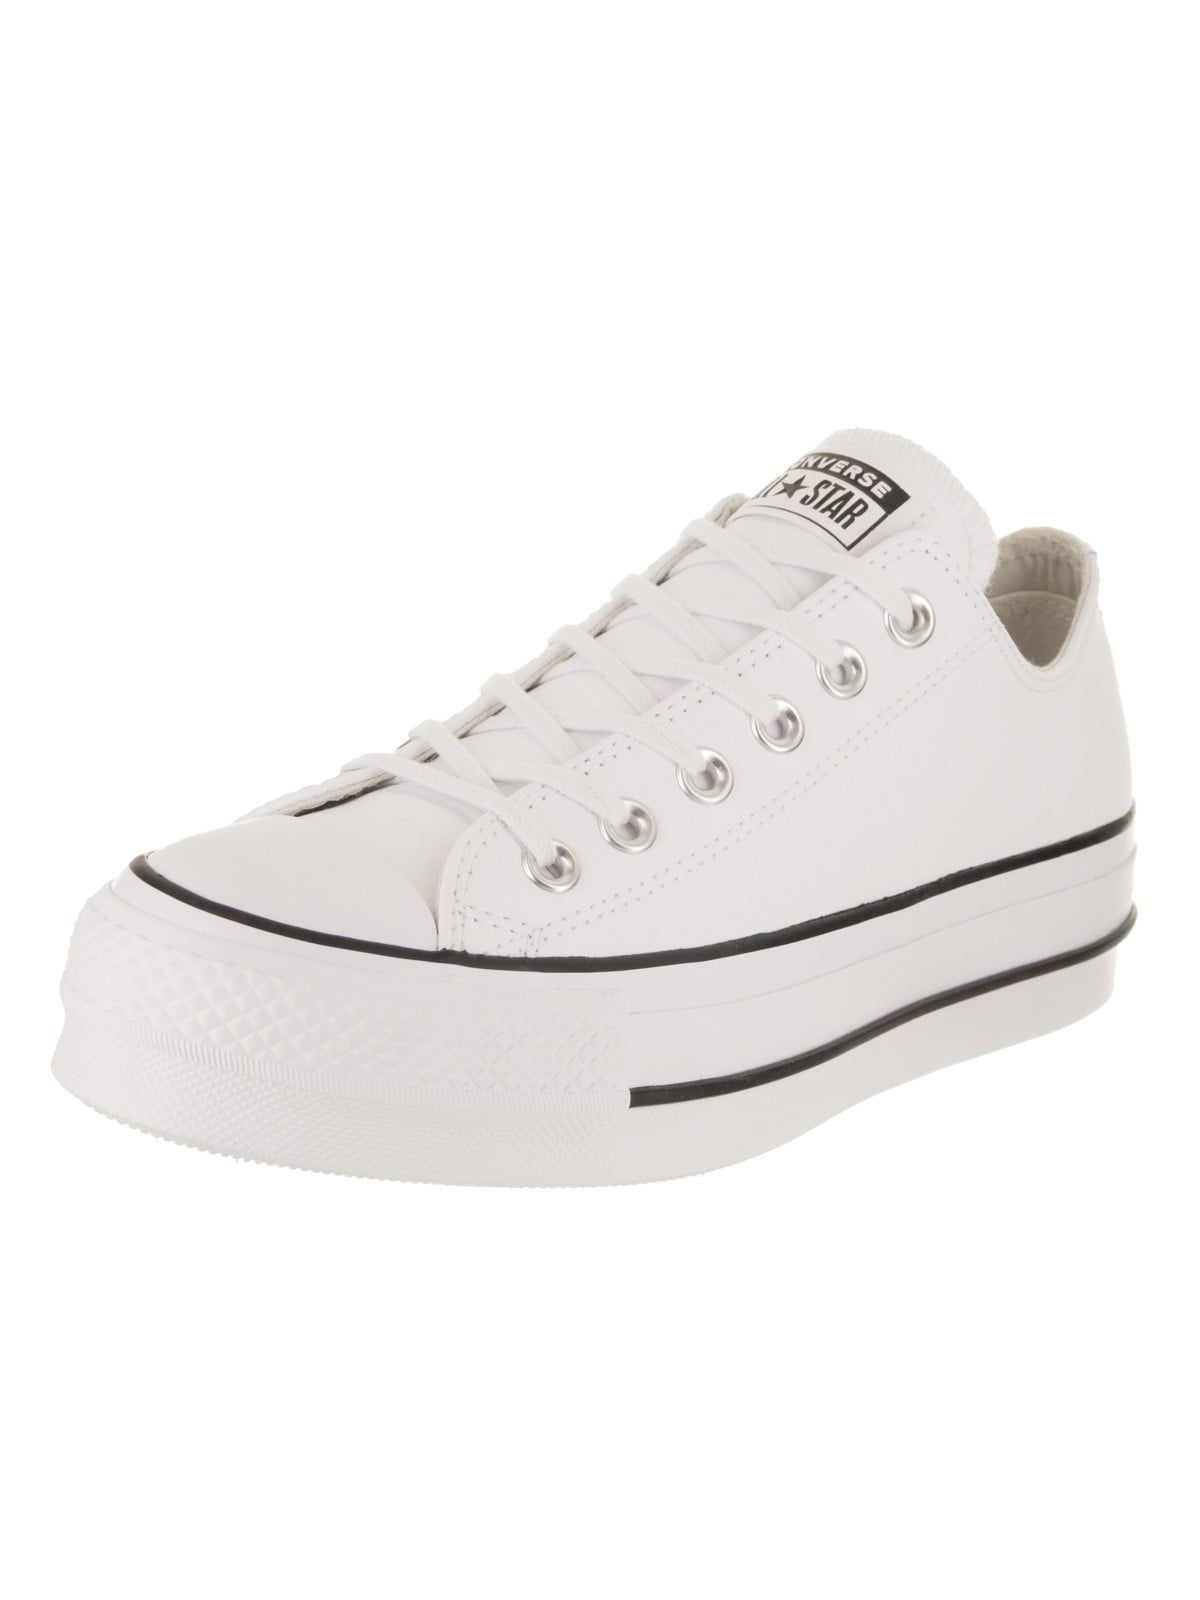 Converse Chuck Taylor All Star Black Leather Platform Sneakers | MYER